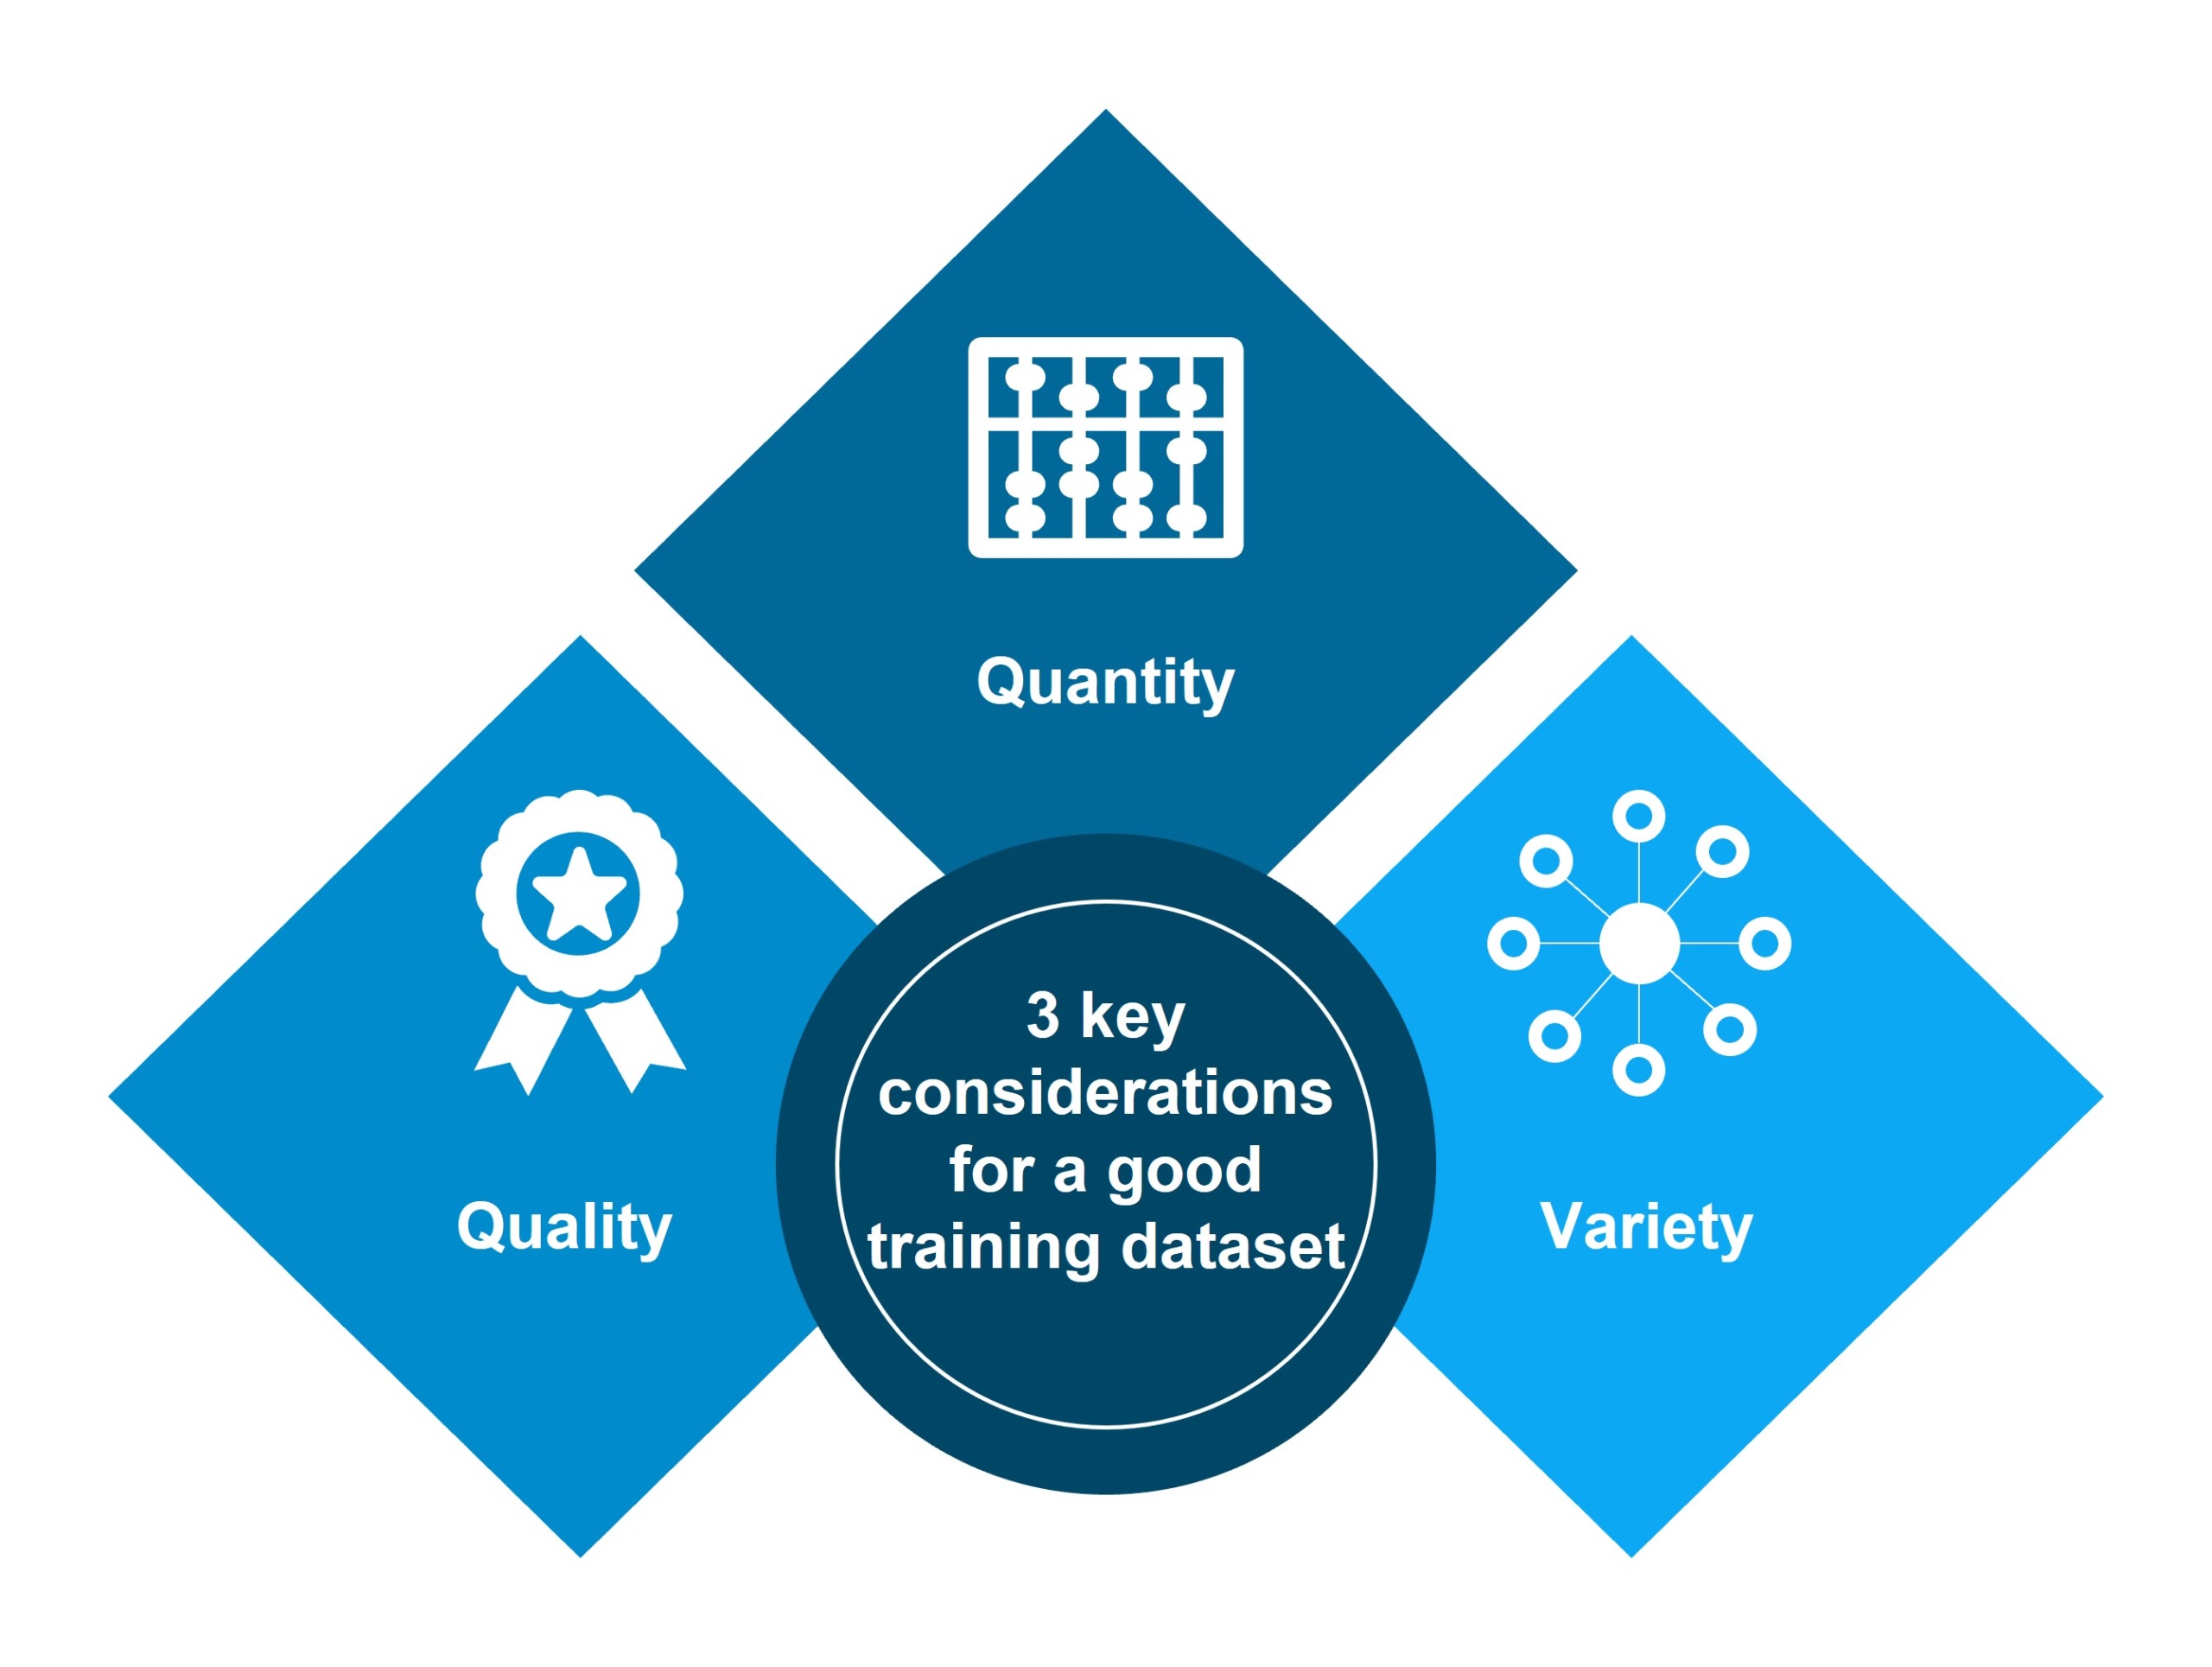 Key considerations for a good training dataset